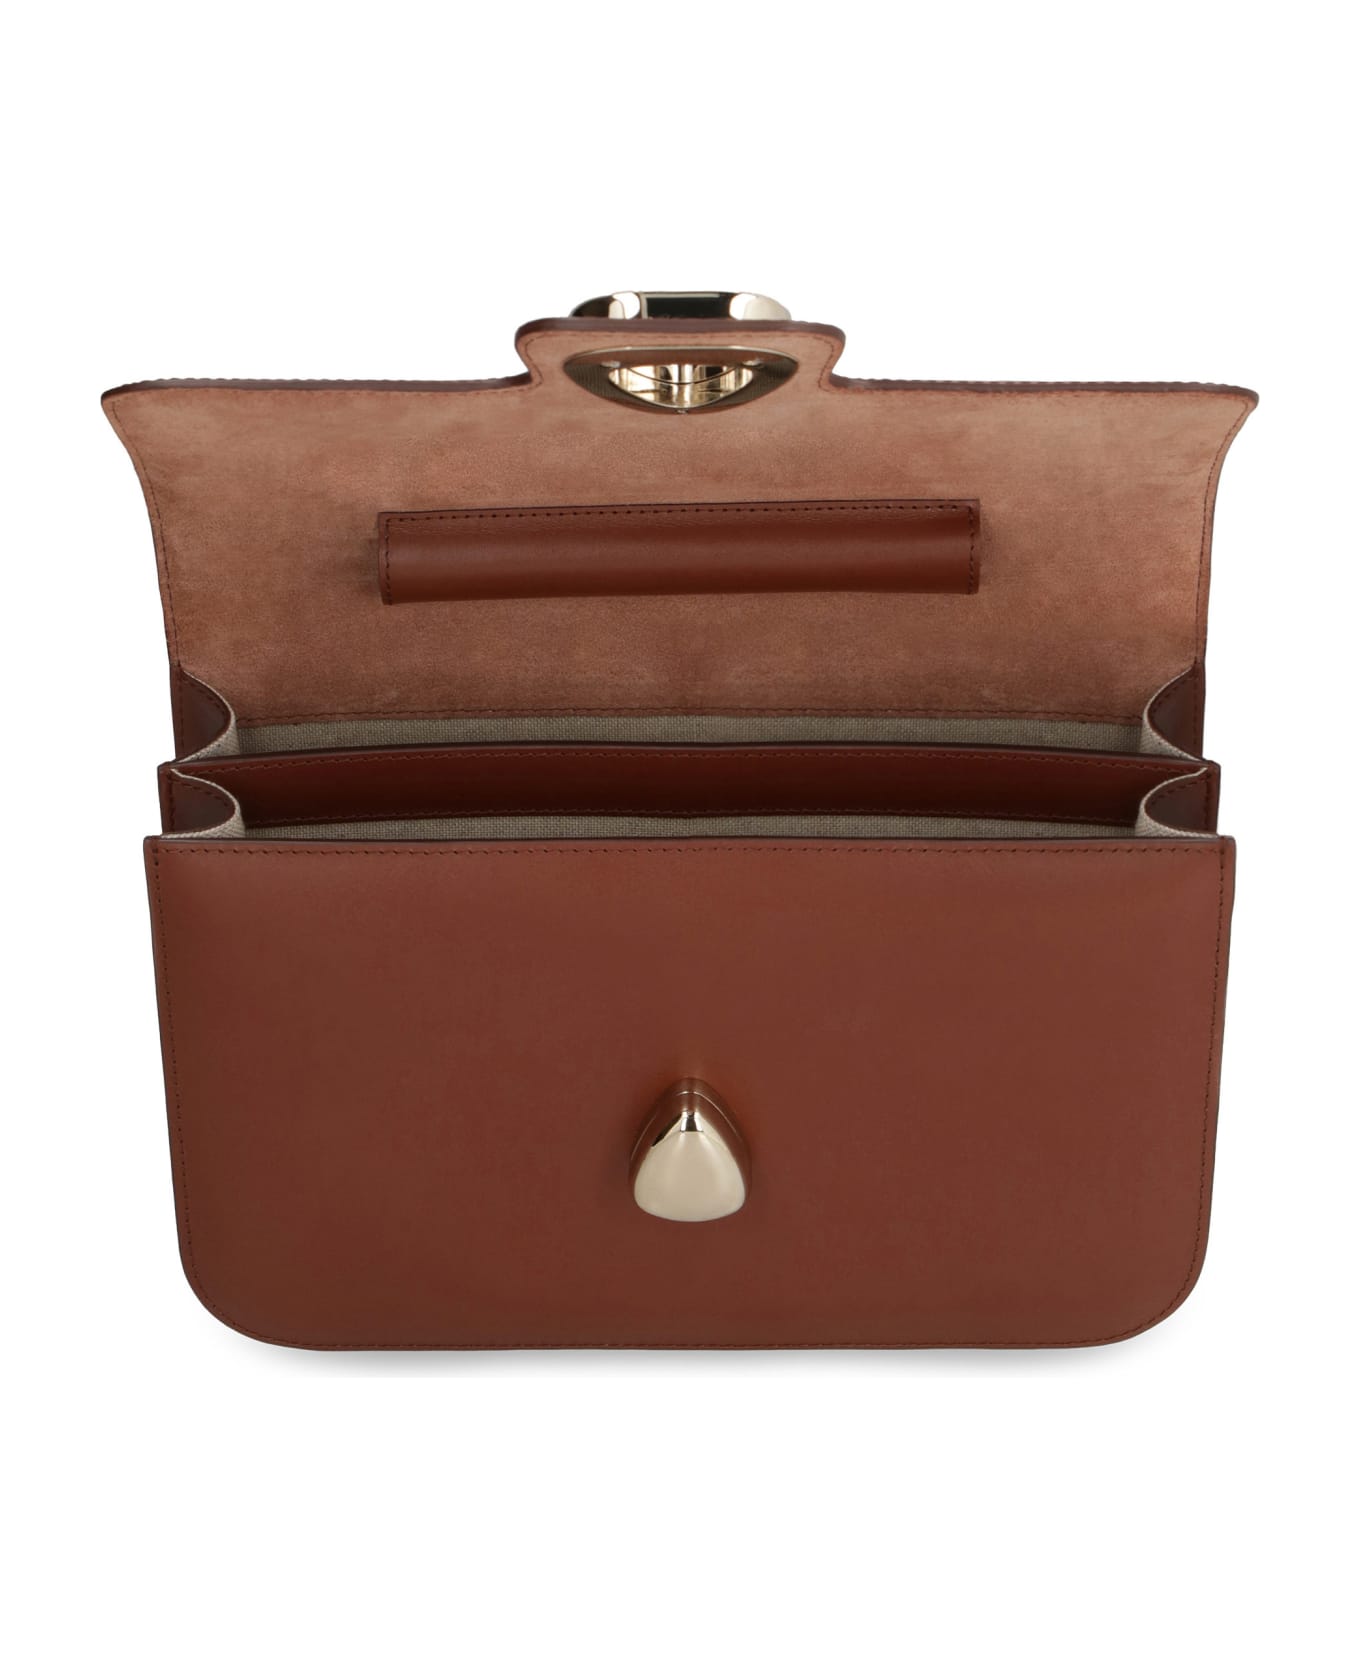 A.P.C. Astra Leather Small Bag - Saddle Brown